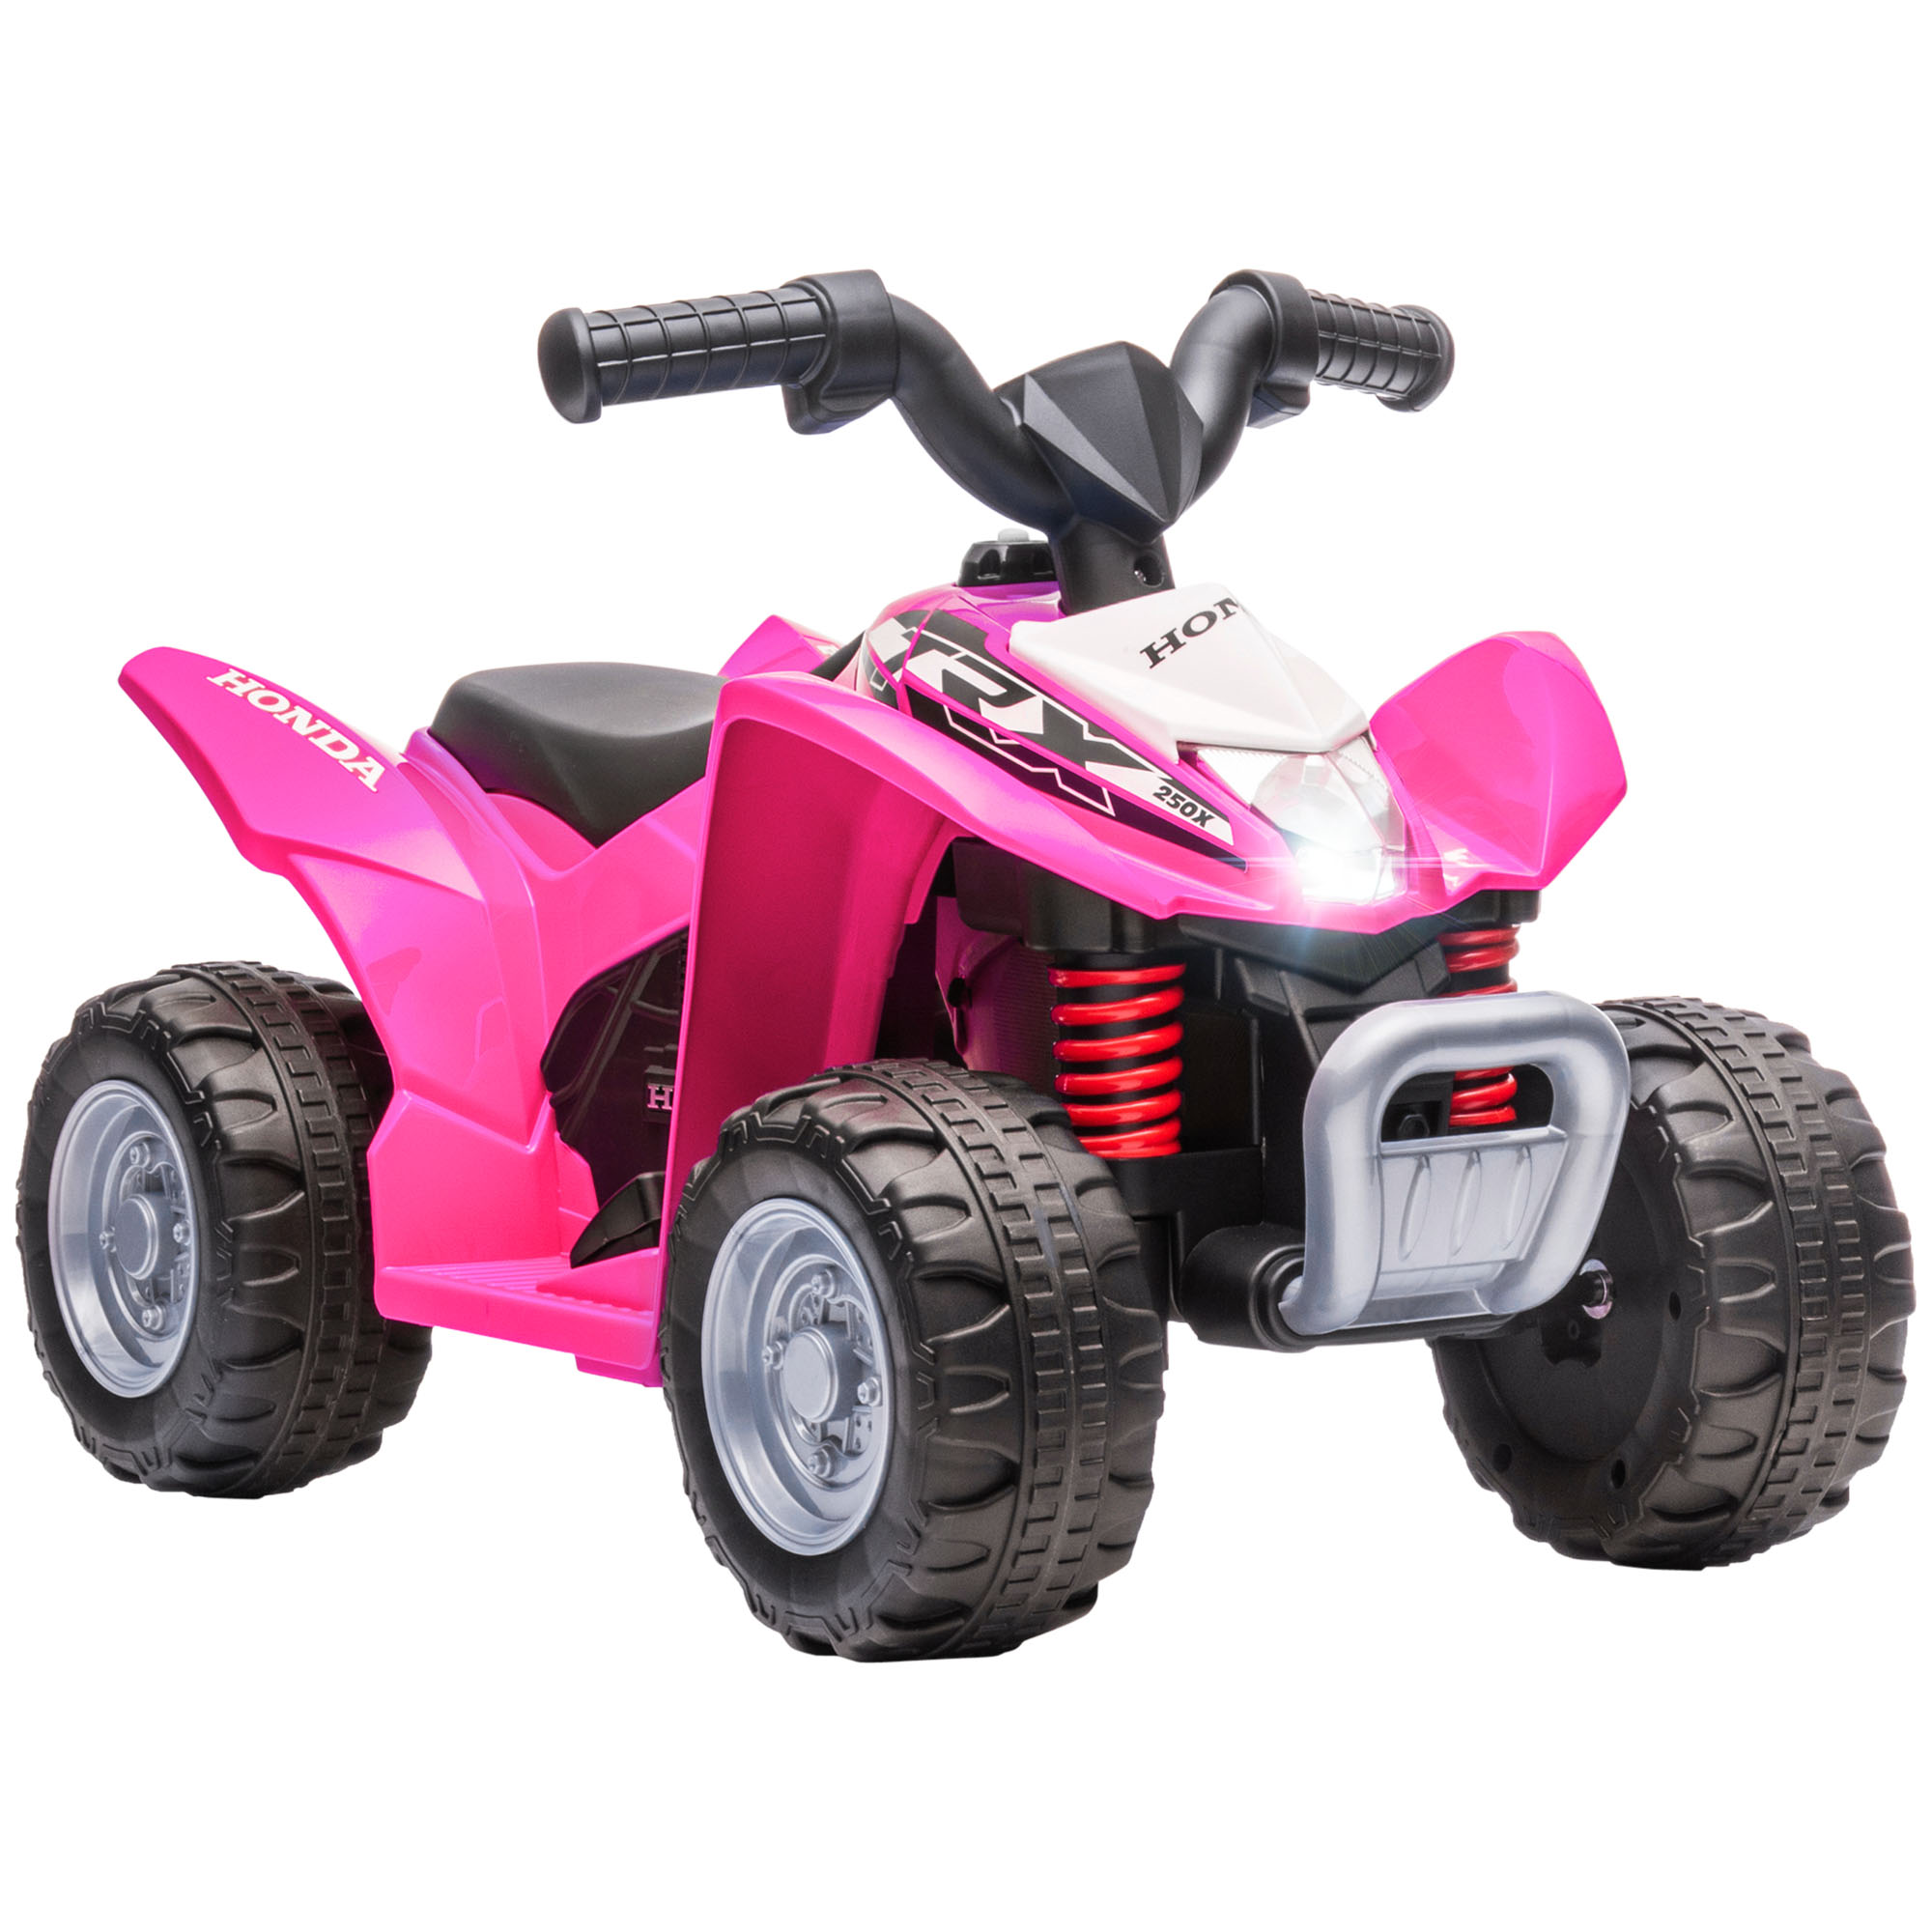 Aiyaplay Honda Licensed Kids Quad Bike, 6v Electric Ride On Car Atv Toy With Led Light Horn For 1.5-3 Years, Pink